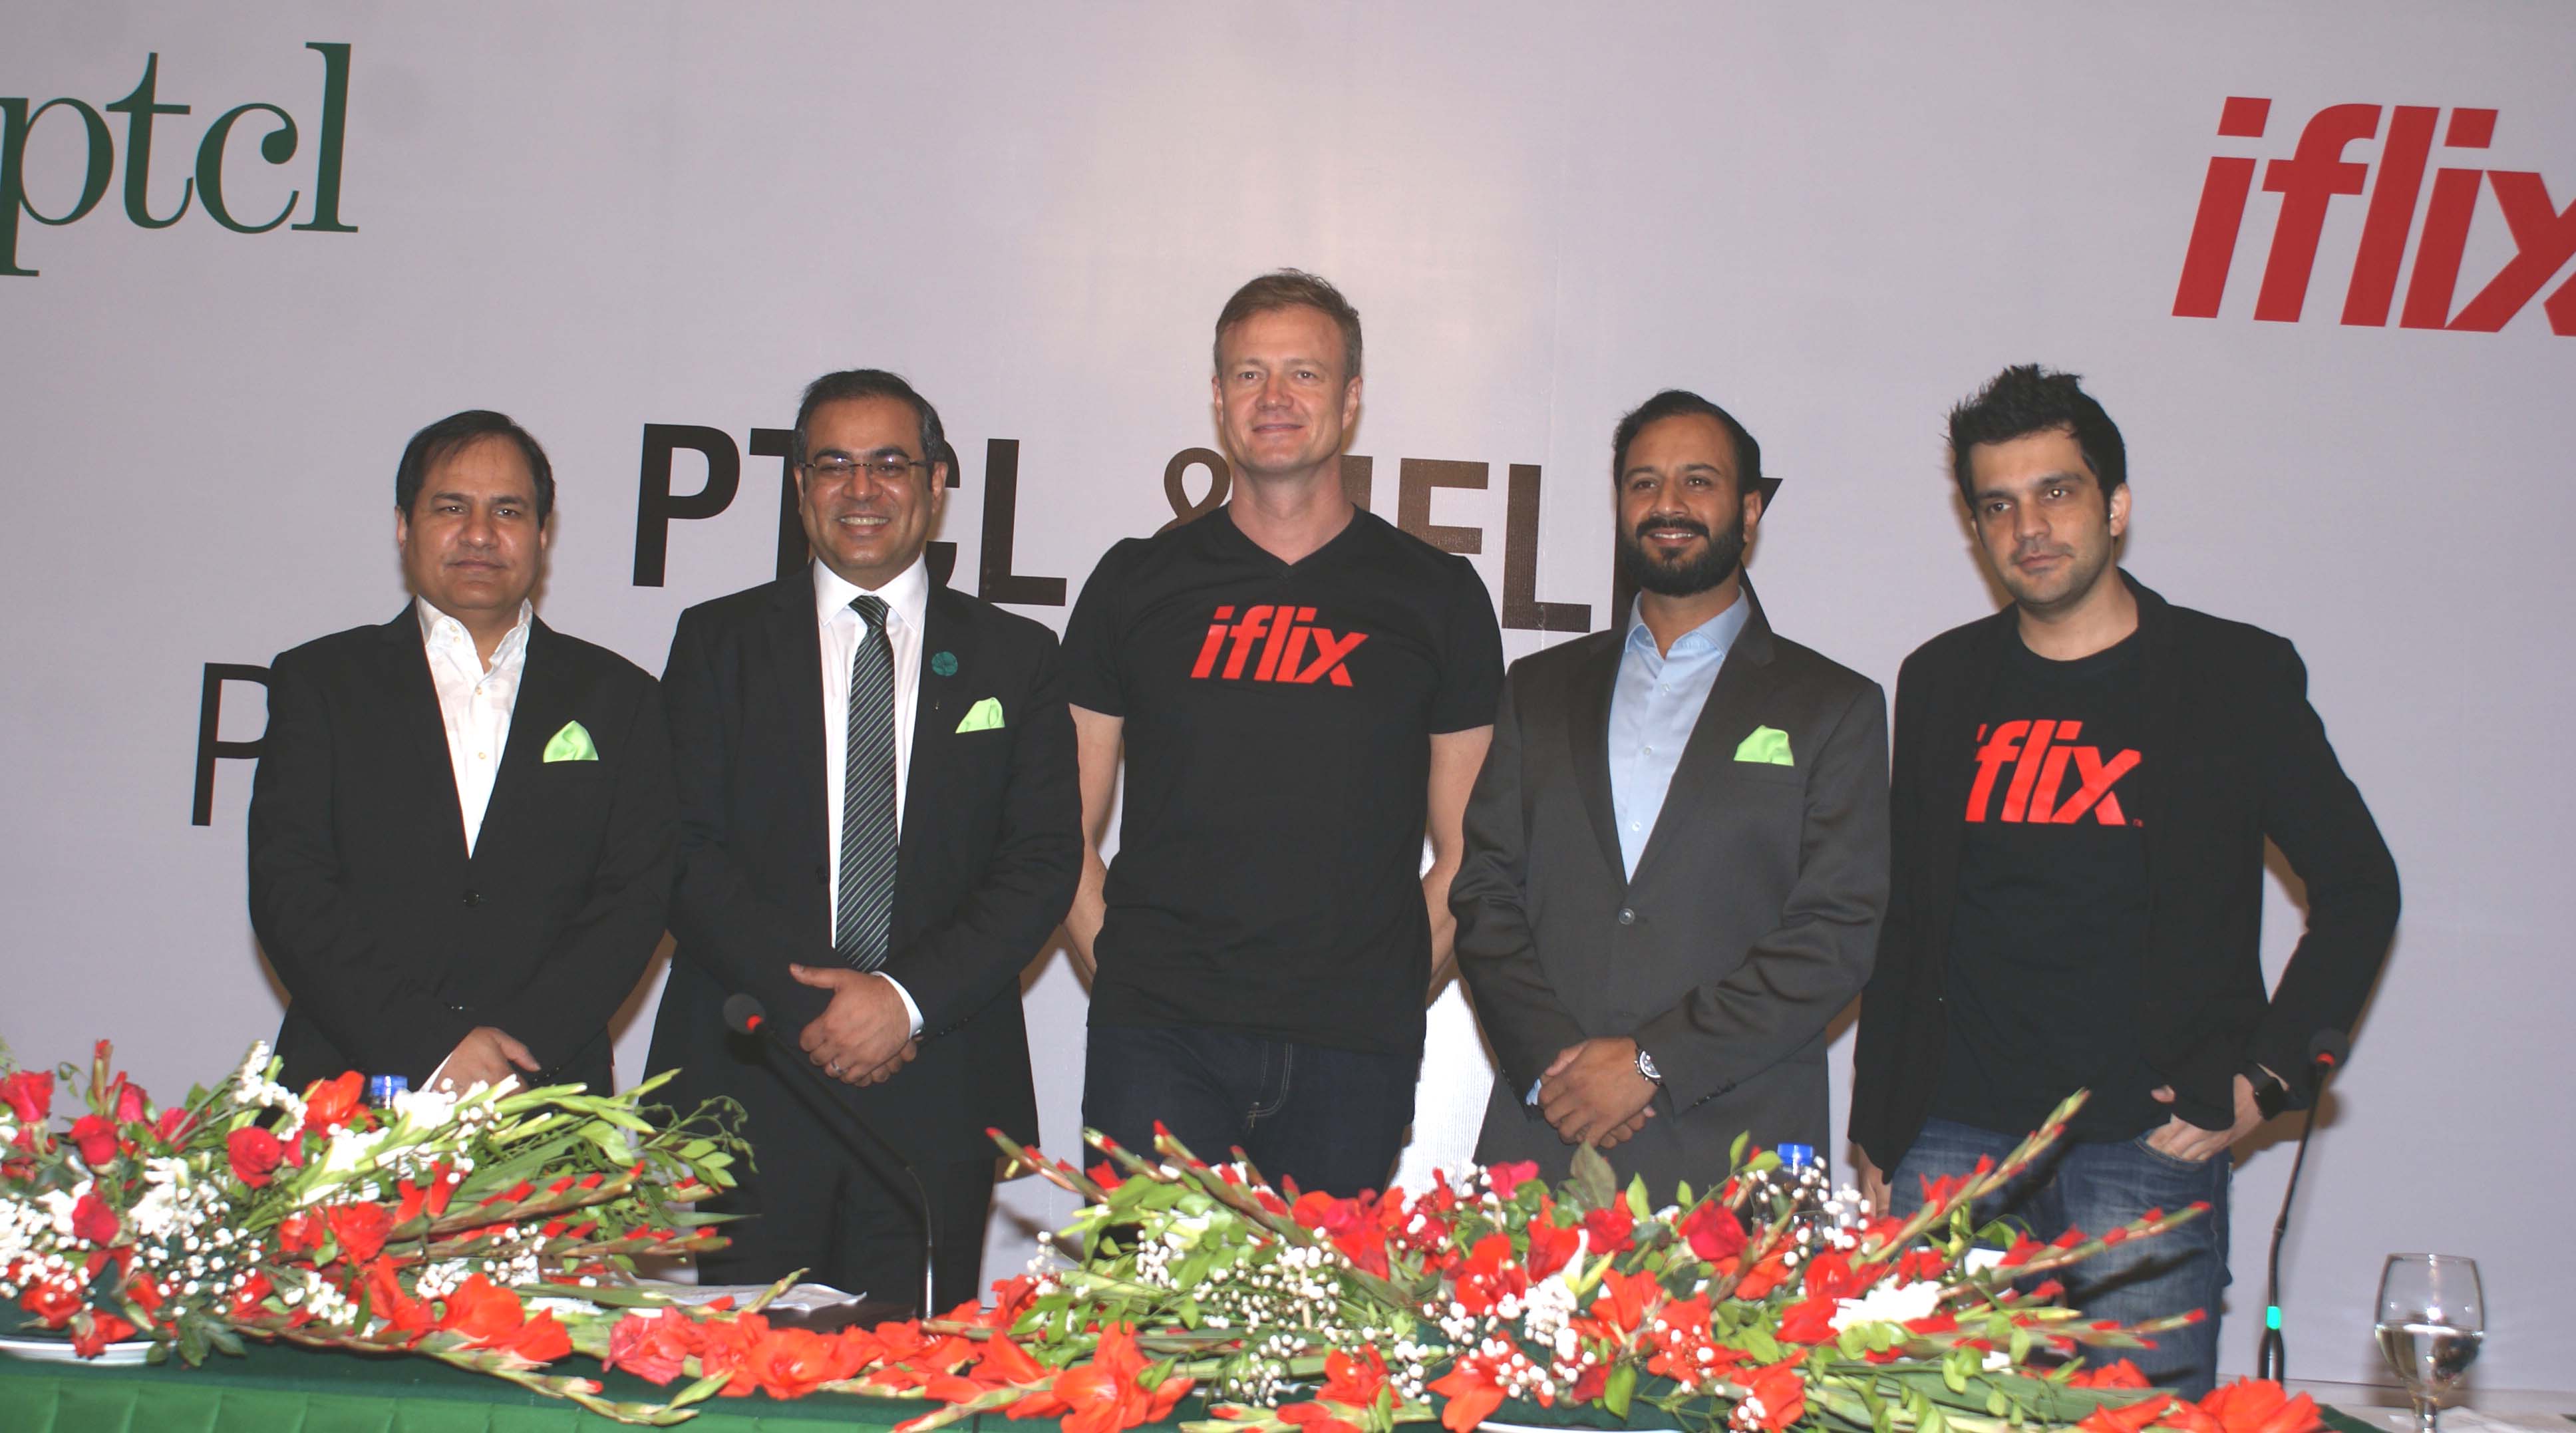 Pakistan Telecommunication Company Limited (PTCL), the country’s leading ICT services provider, has announced its collaboration with iflix